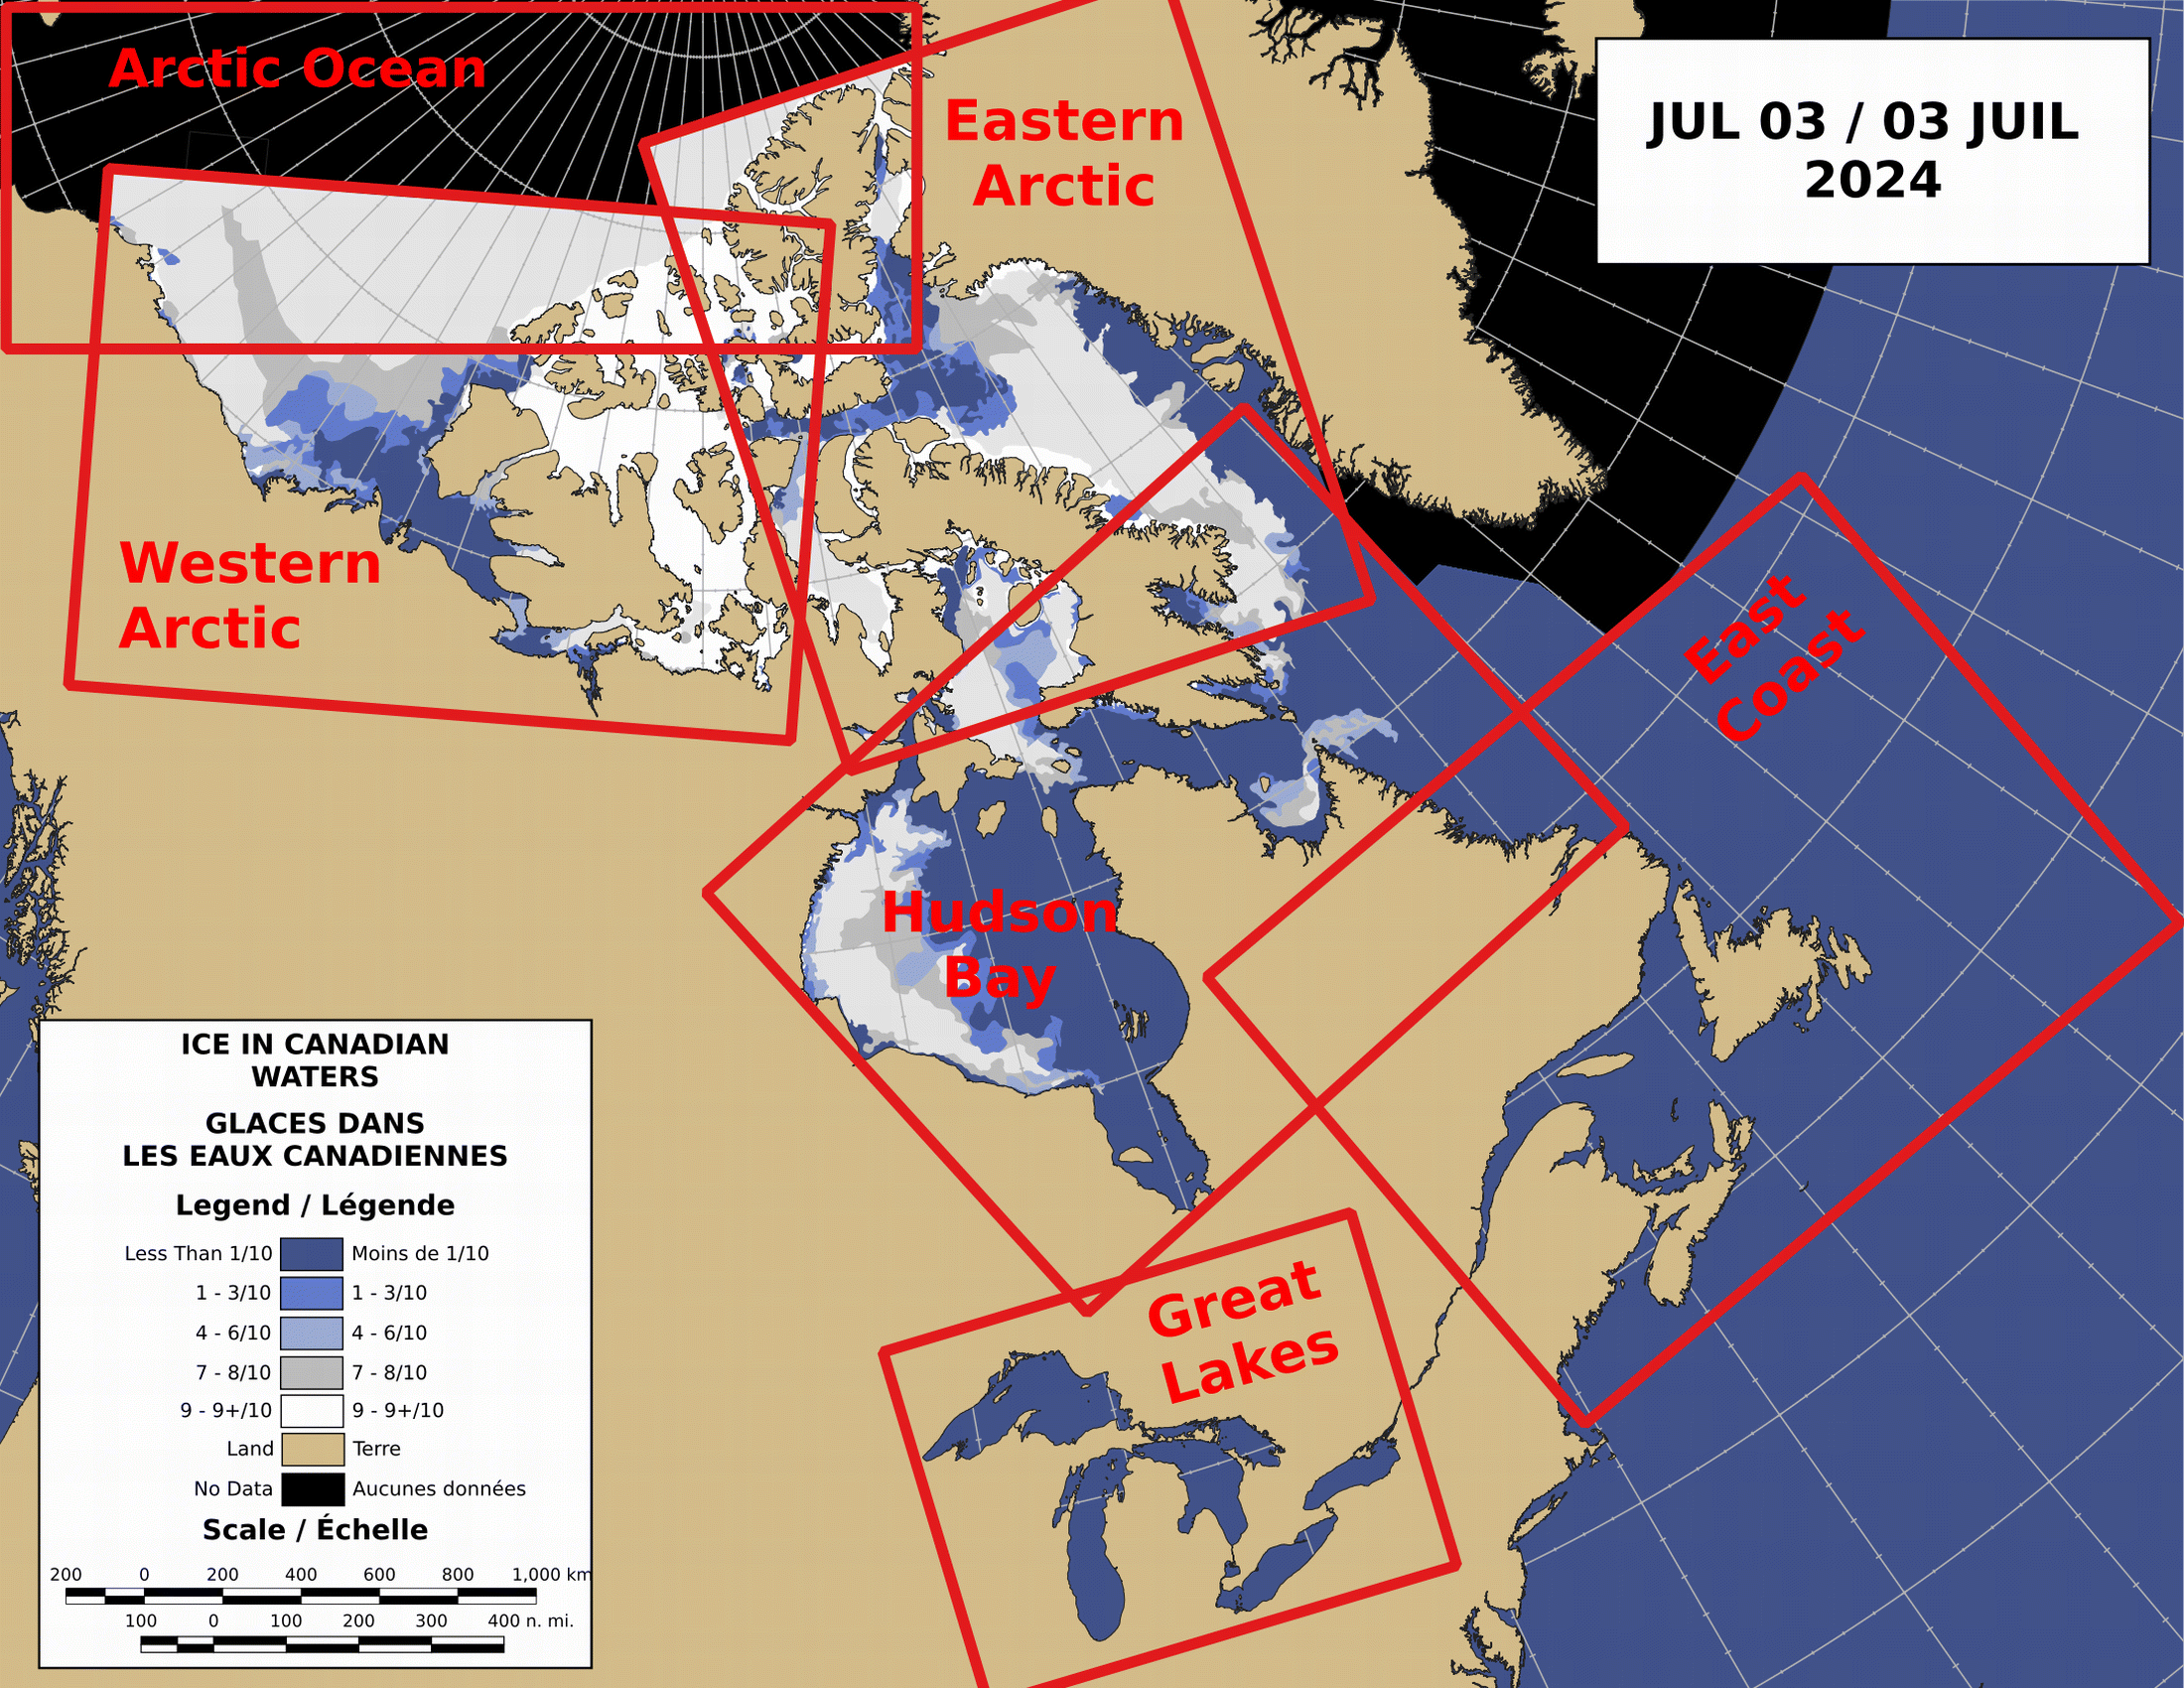 Current ice cover in Canadian Waters